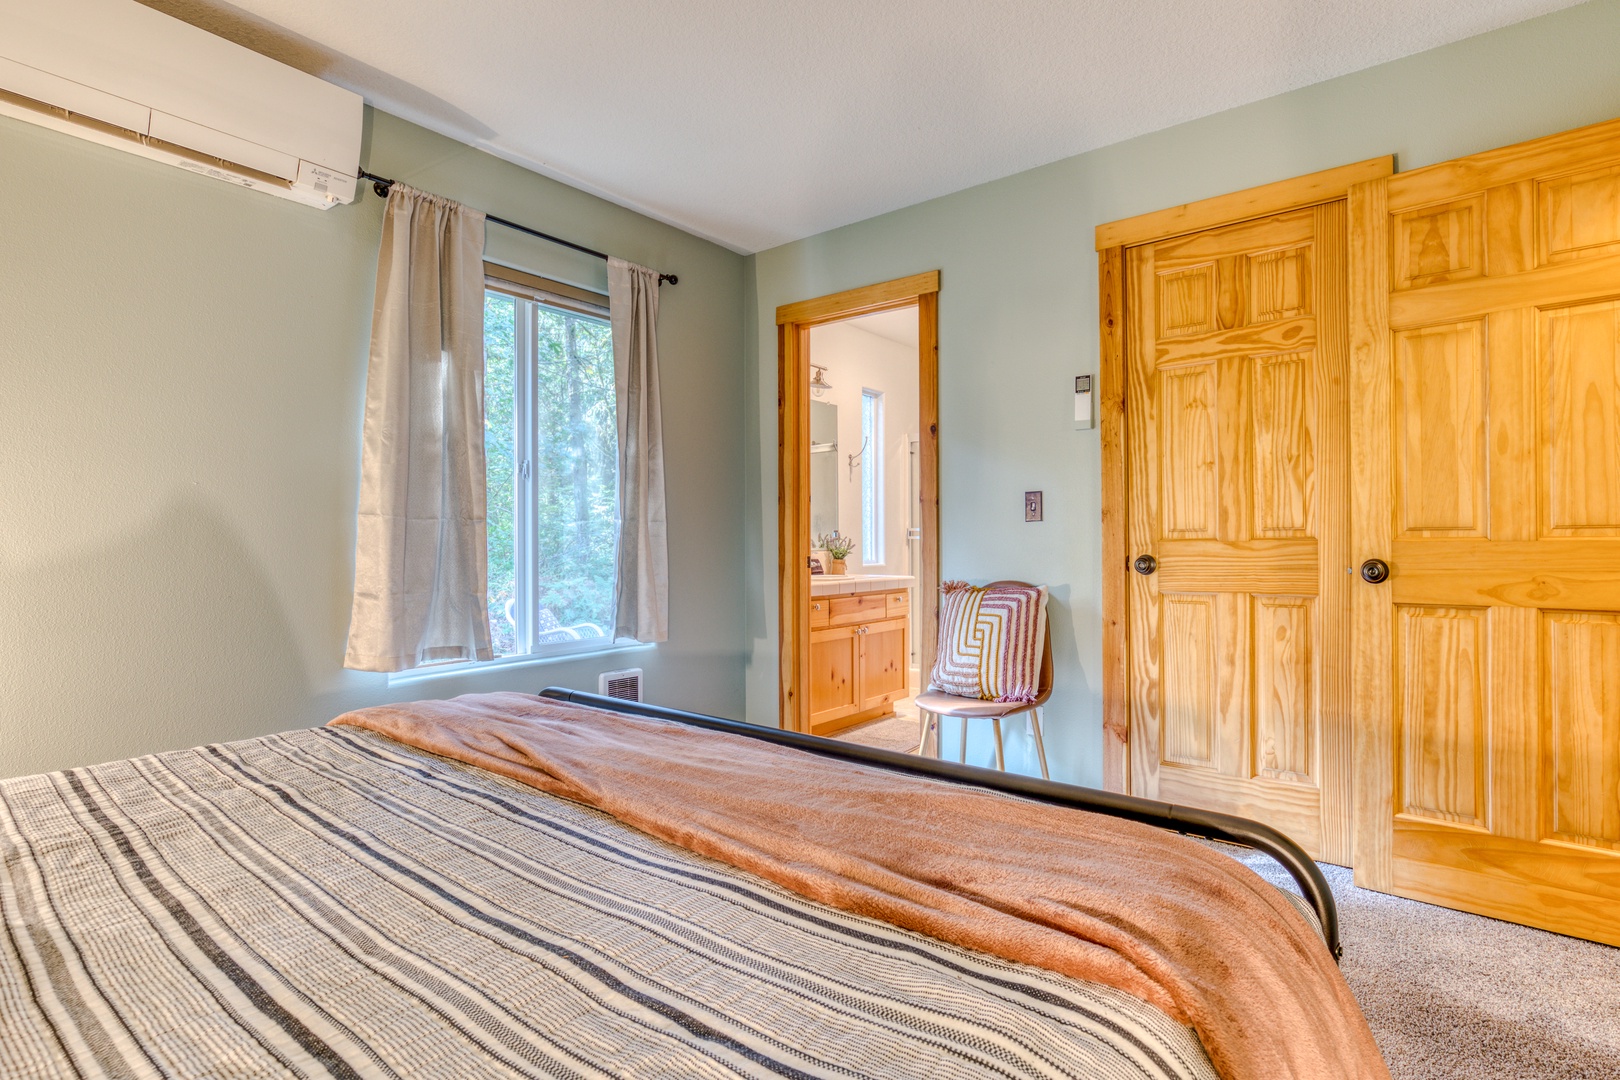 Brightwood Vacation Rentals, Riverside Retreat - Enjoy views of the garden from the privacy of the Primary Bedroom